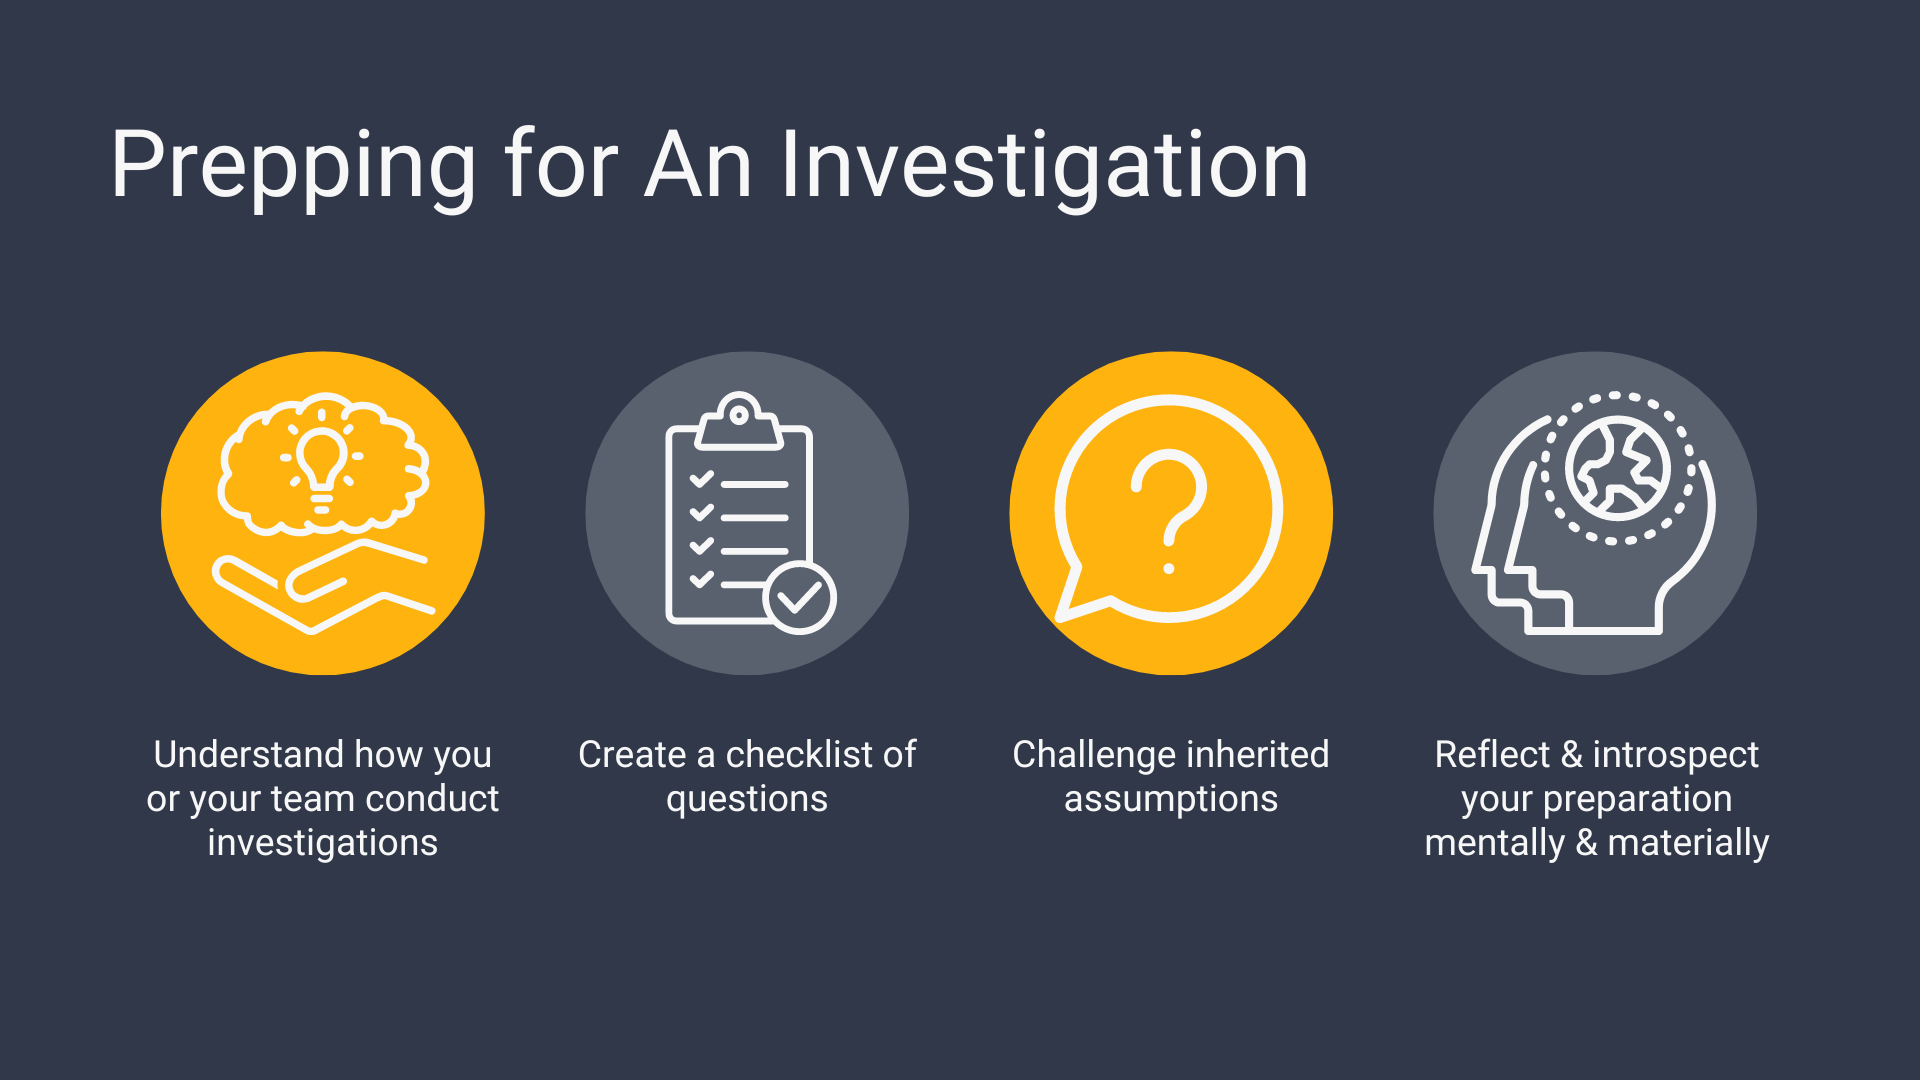 How to prepare or set the initial objective for your investigations